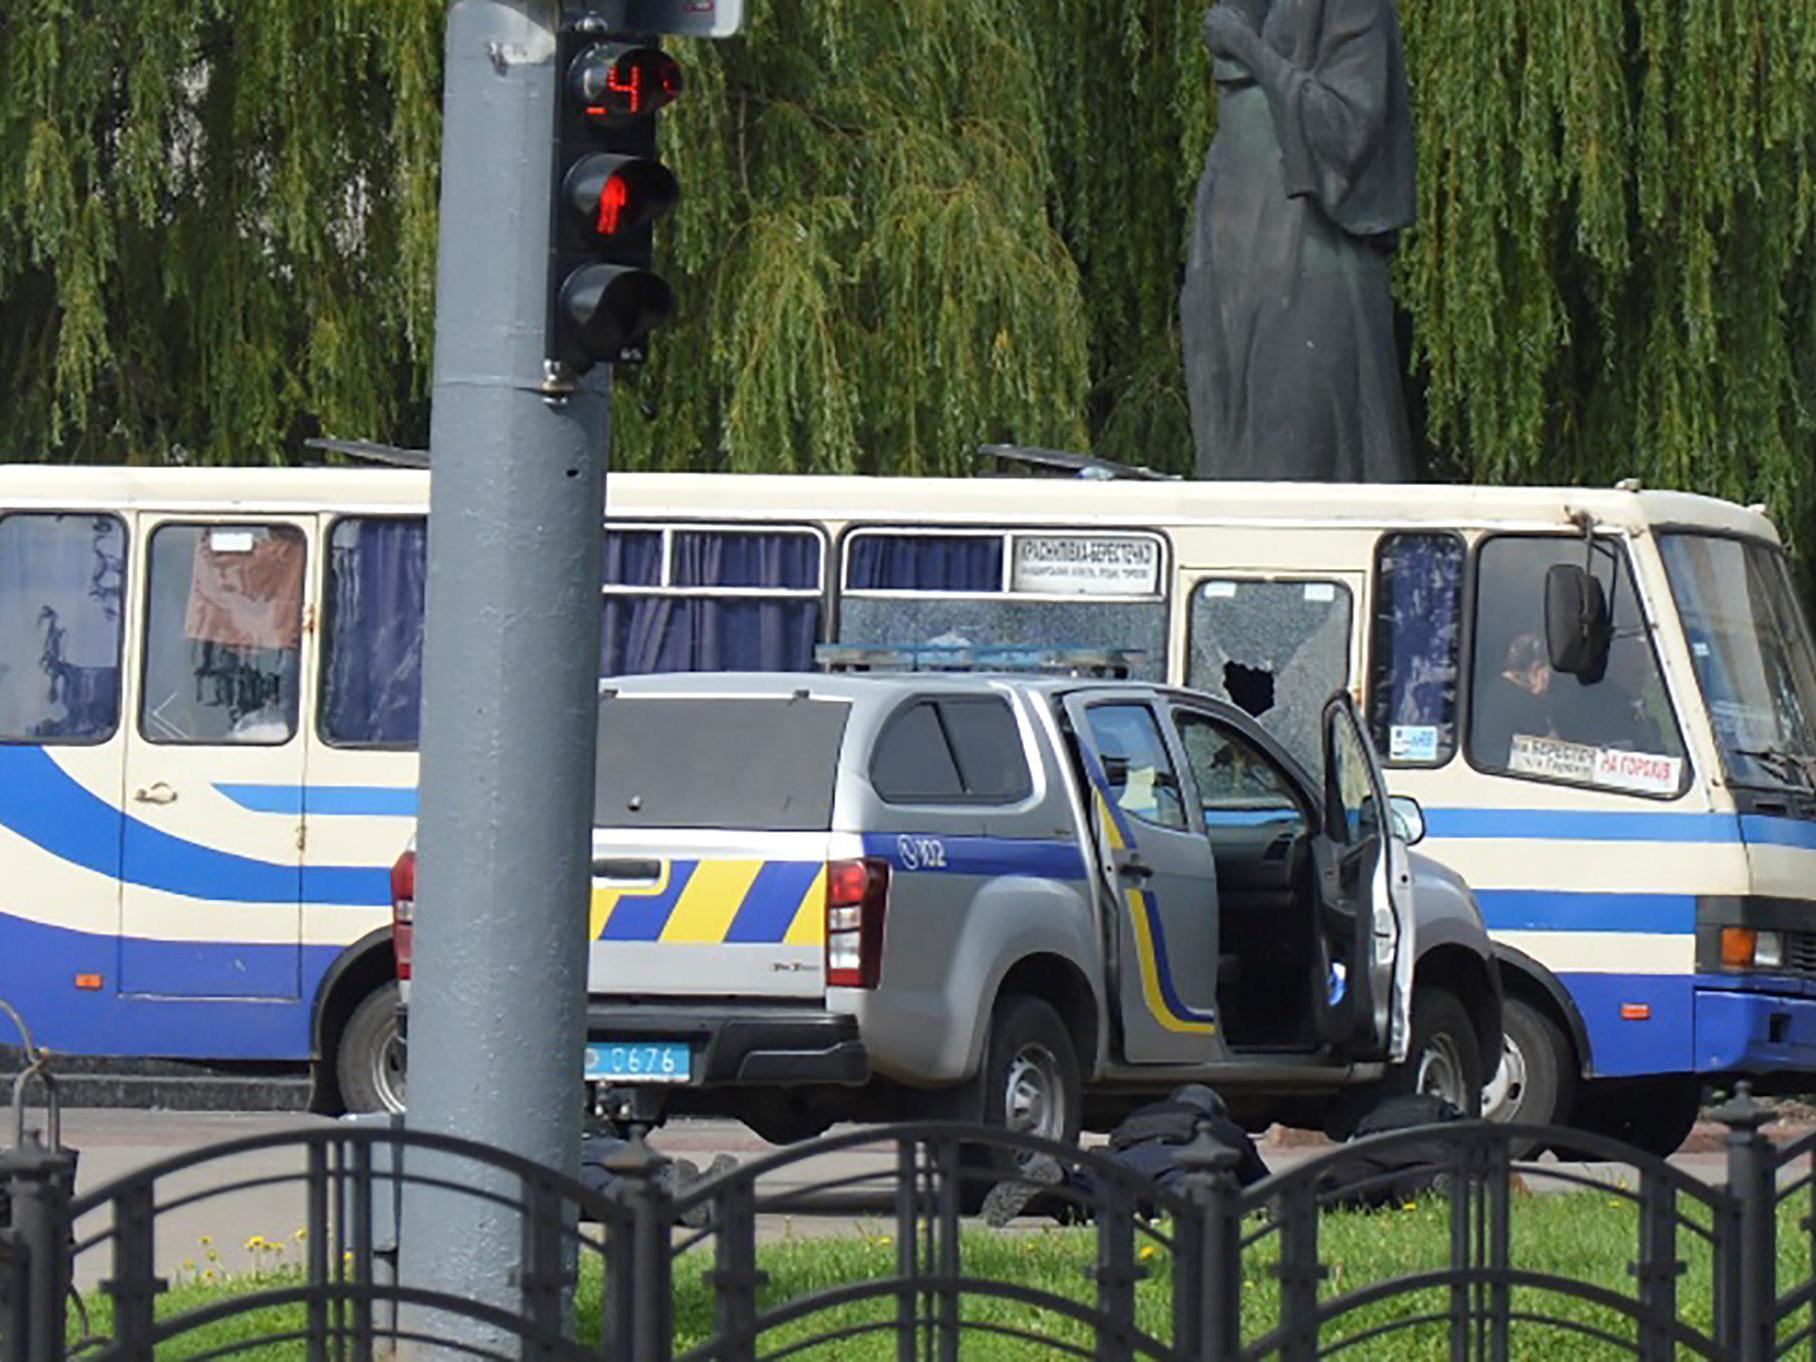 Ukrainian law enforcement officers respond to a hostage situation in the city of Lutsk, Ukraine, on 21 July, 2020.